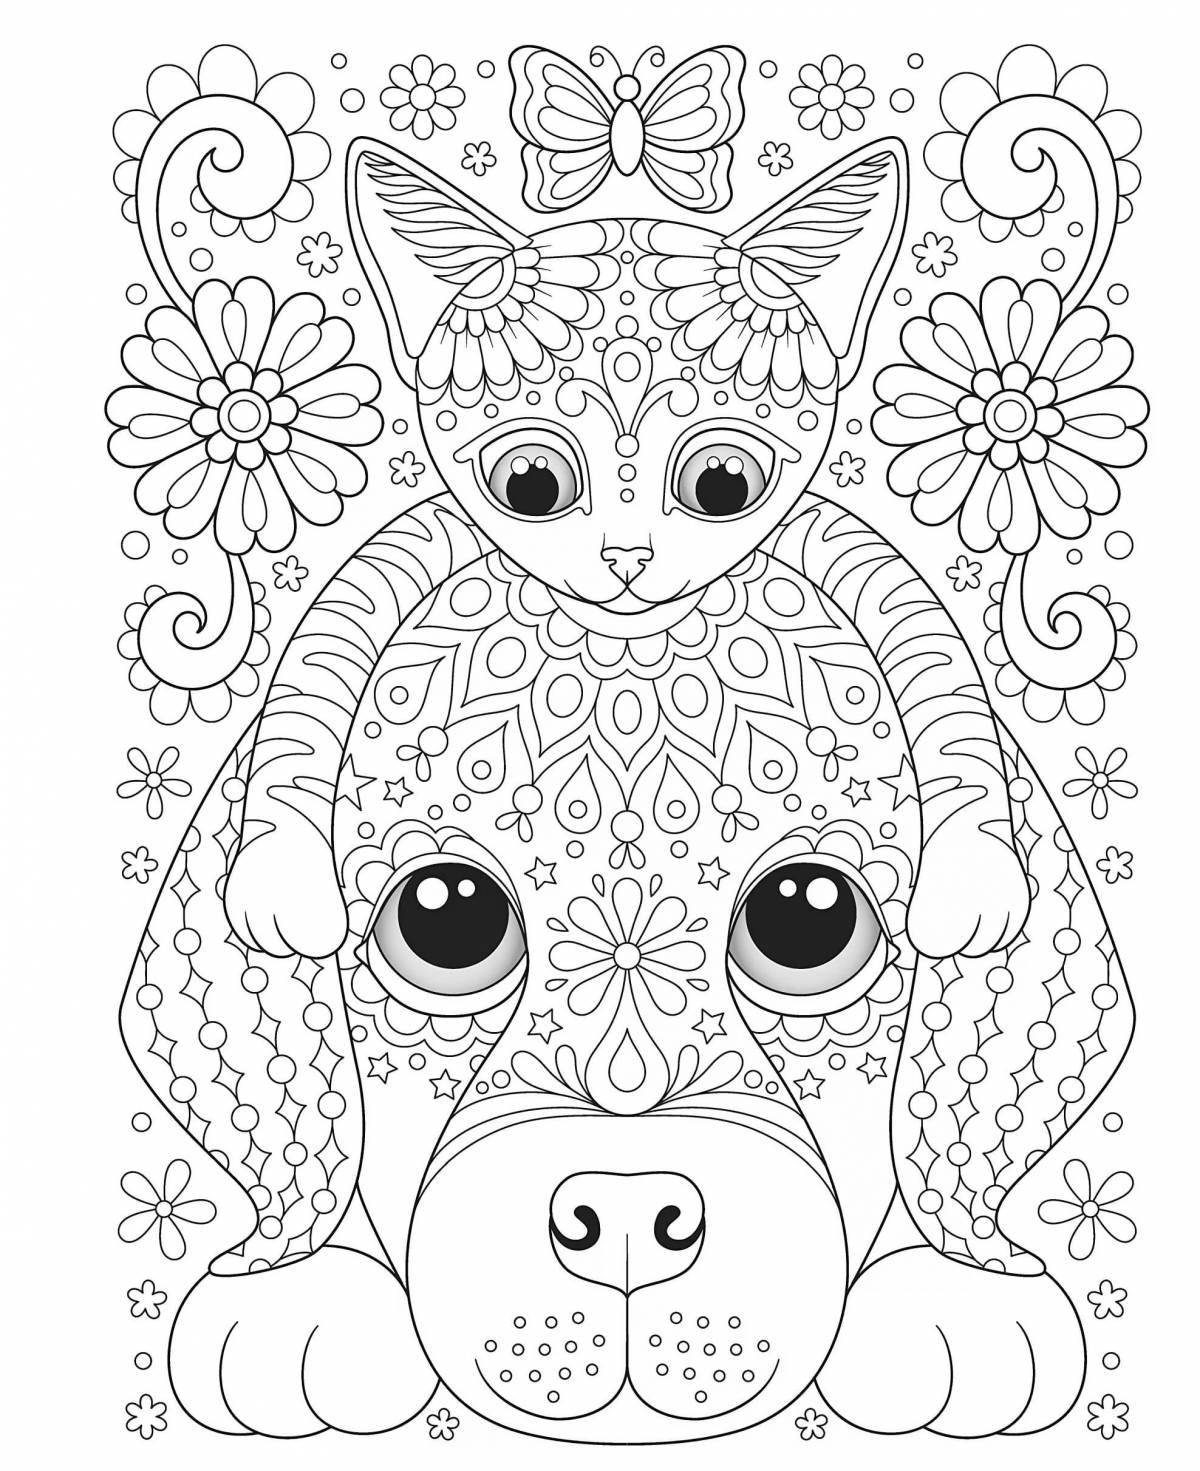 Coloring book for girls with 9 year old animals